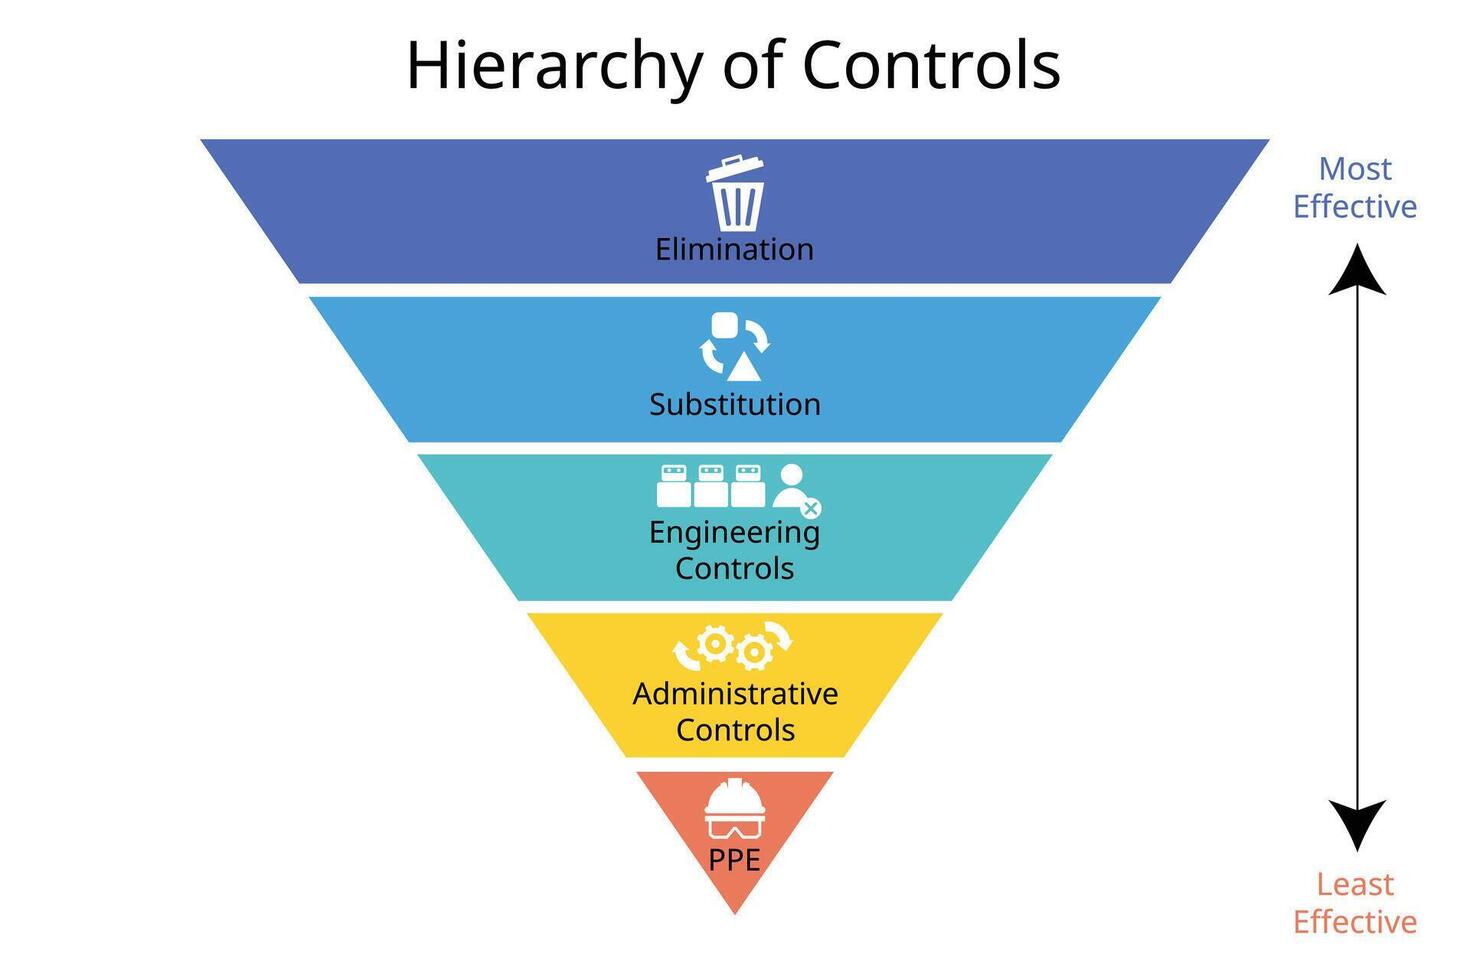 Hierarchy of Controls to Control exposures to hazards in the workplace is vital to protecting workers for Elimination, Substitution, Engineering controls, Administrative controls, PPE vector